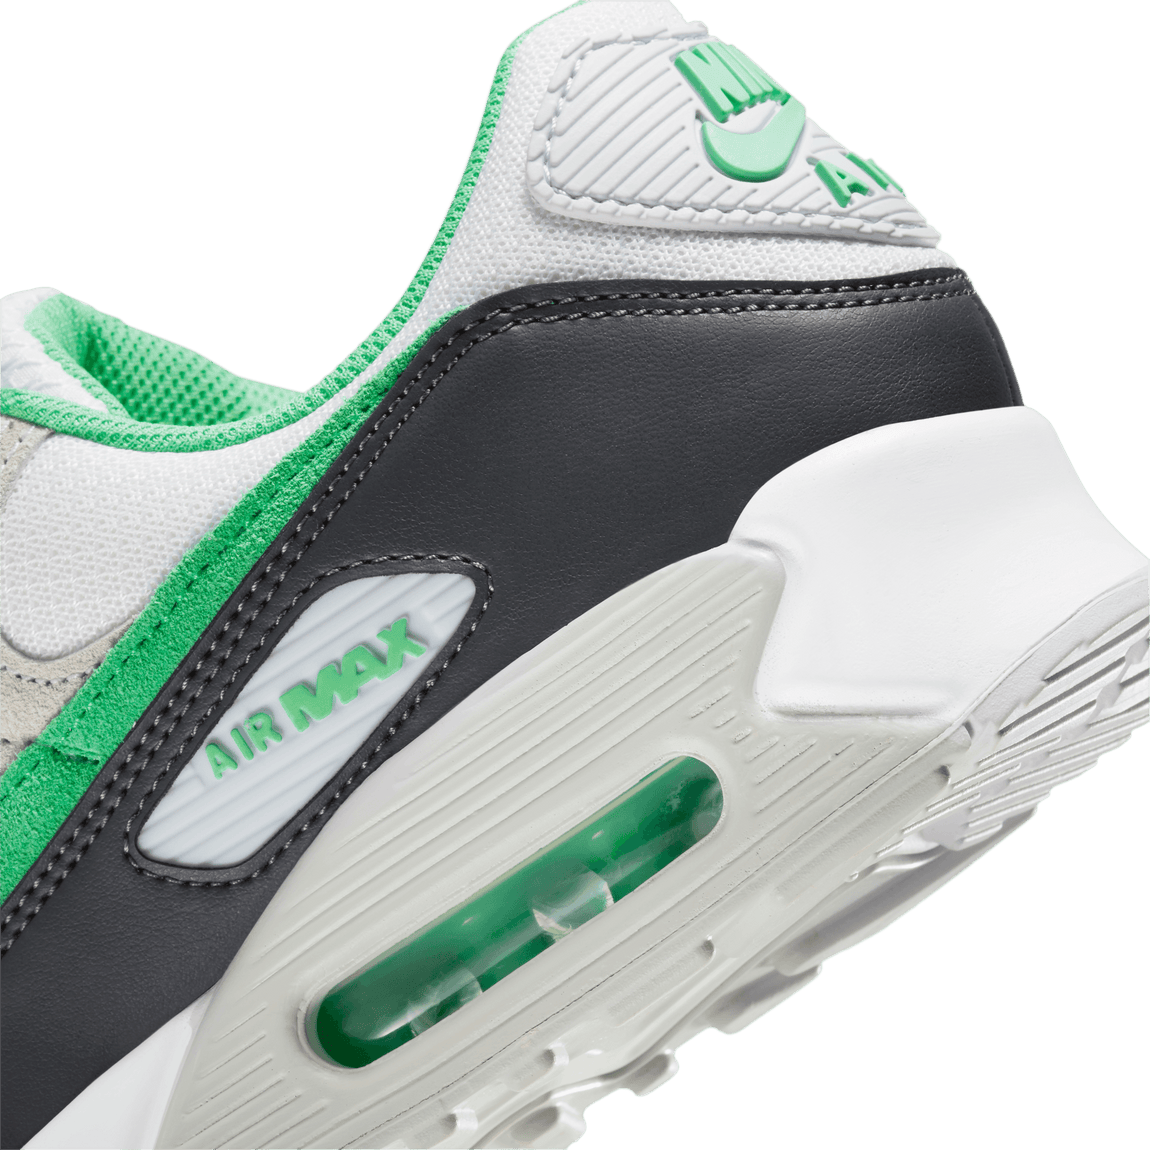 Nike Air Max 90 (White/Spring Green/Anthracite) - Nike Air Max 90 (White/Spring Green/Anthracite) - 